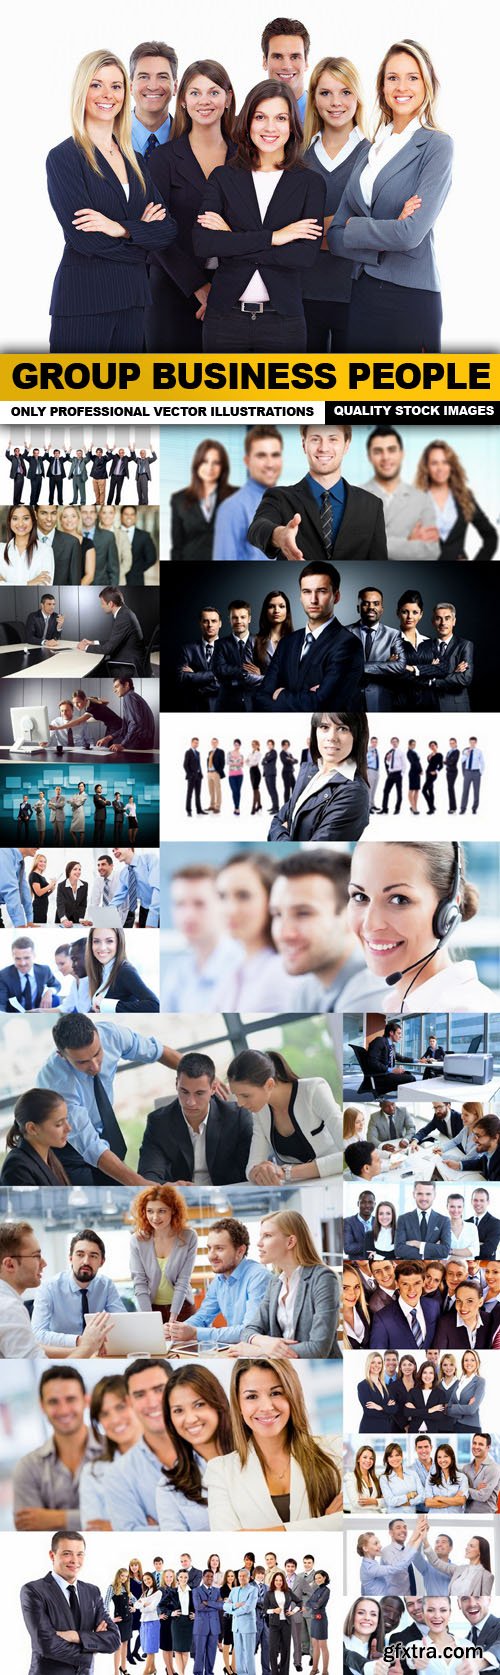 Group Business People - 25 HQ Images